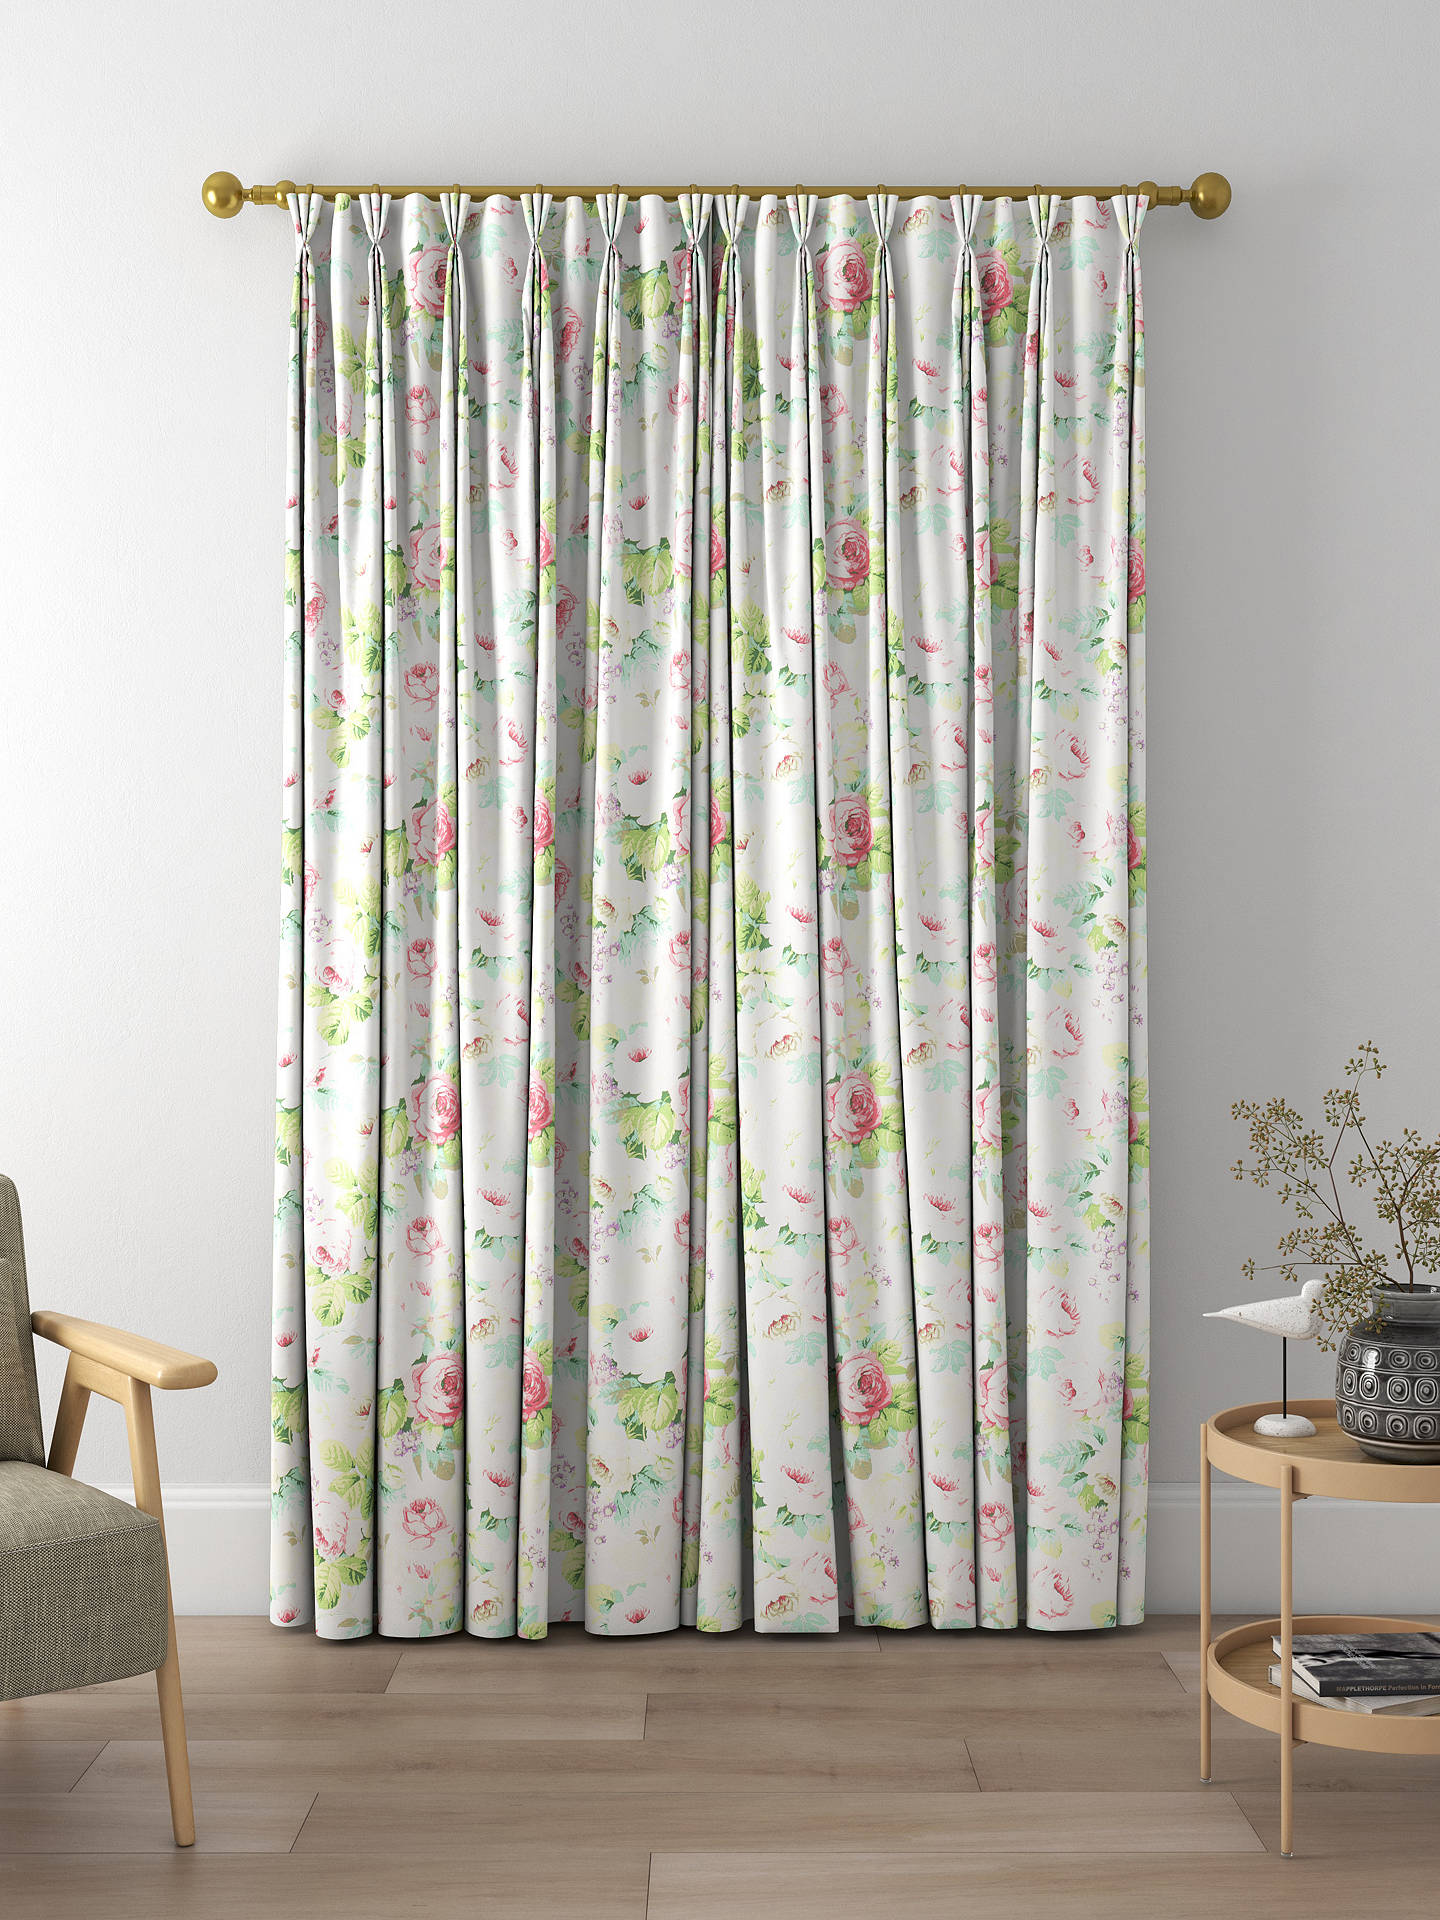 Sanderson Chelsea Made to Measure Curtains, Pink/Celadon